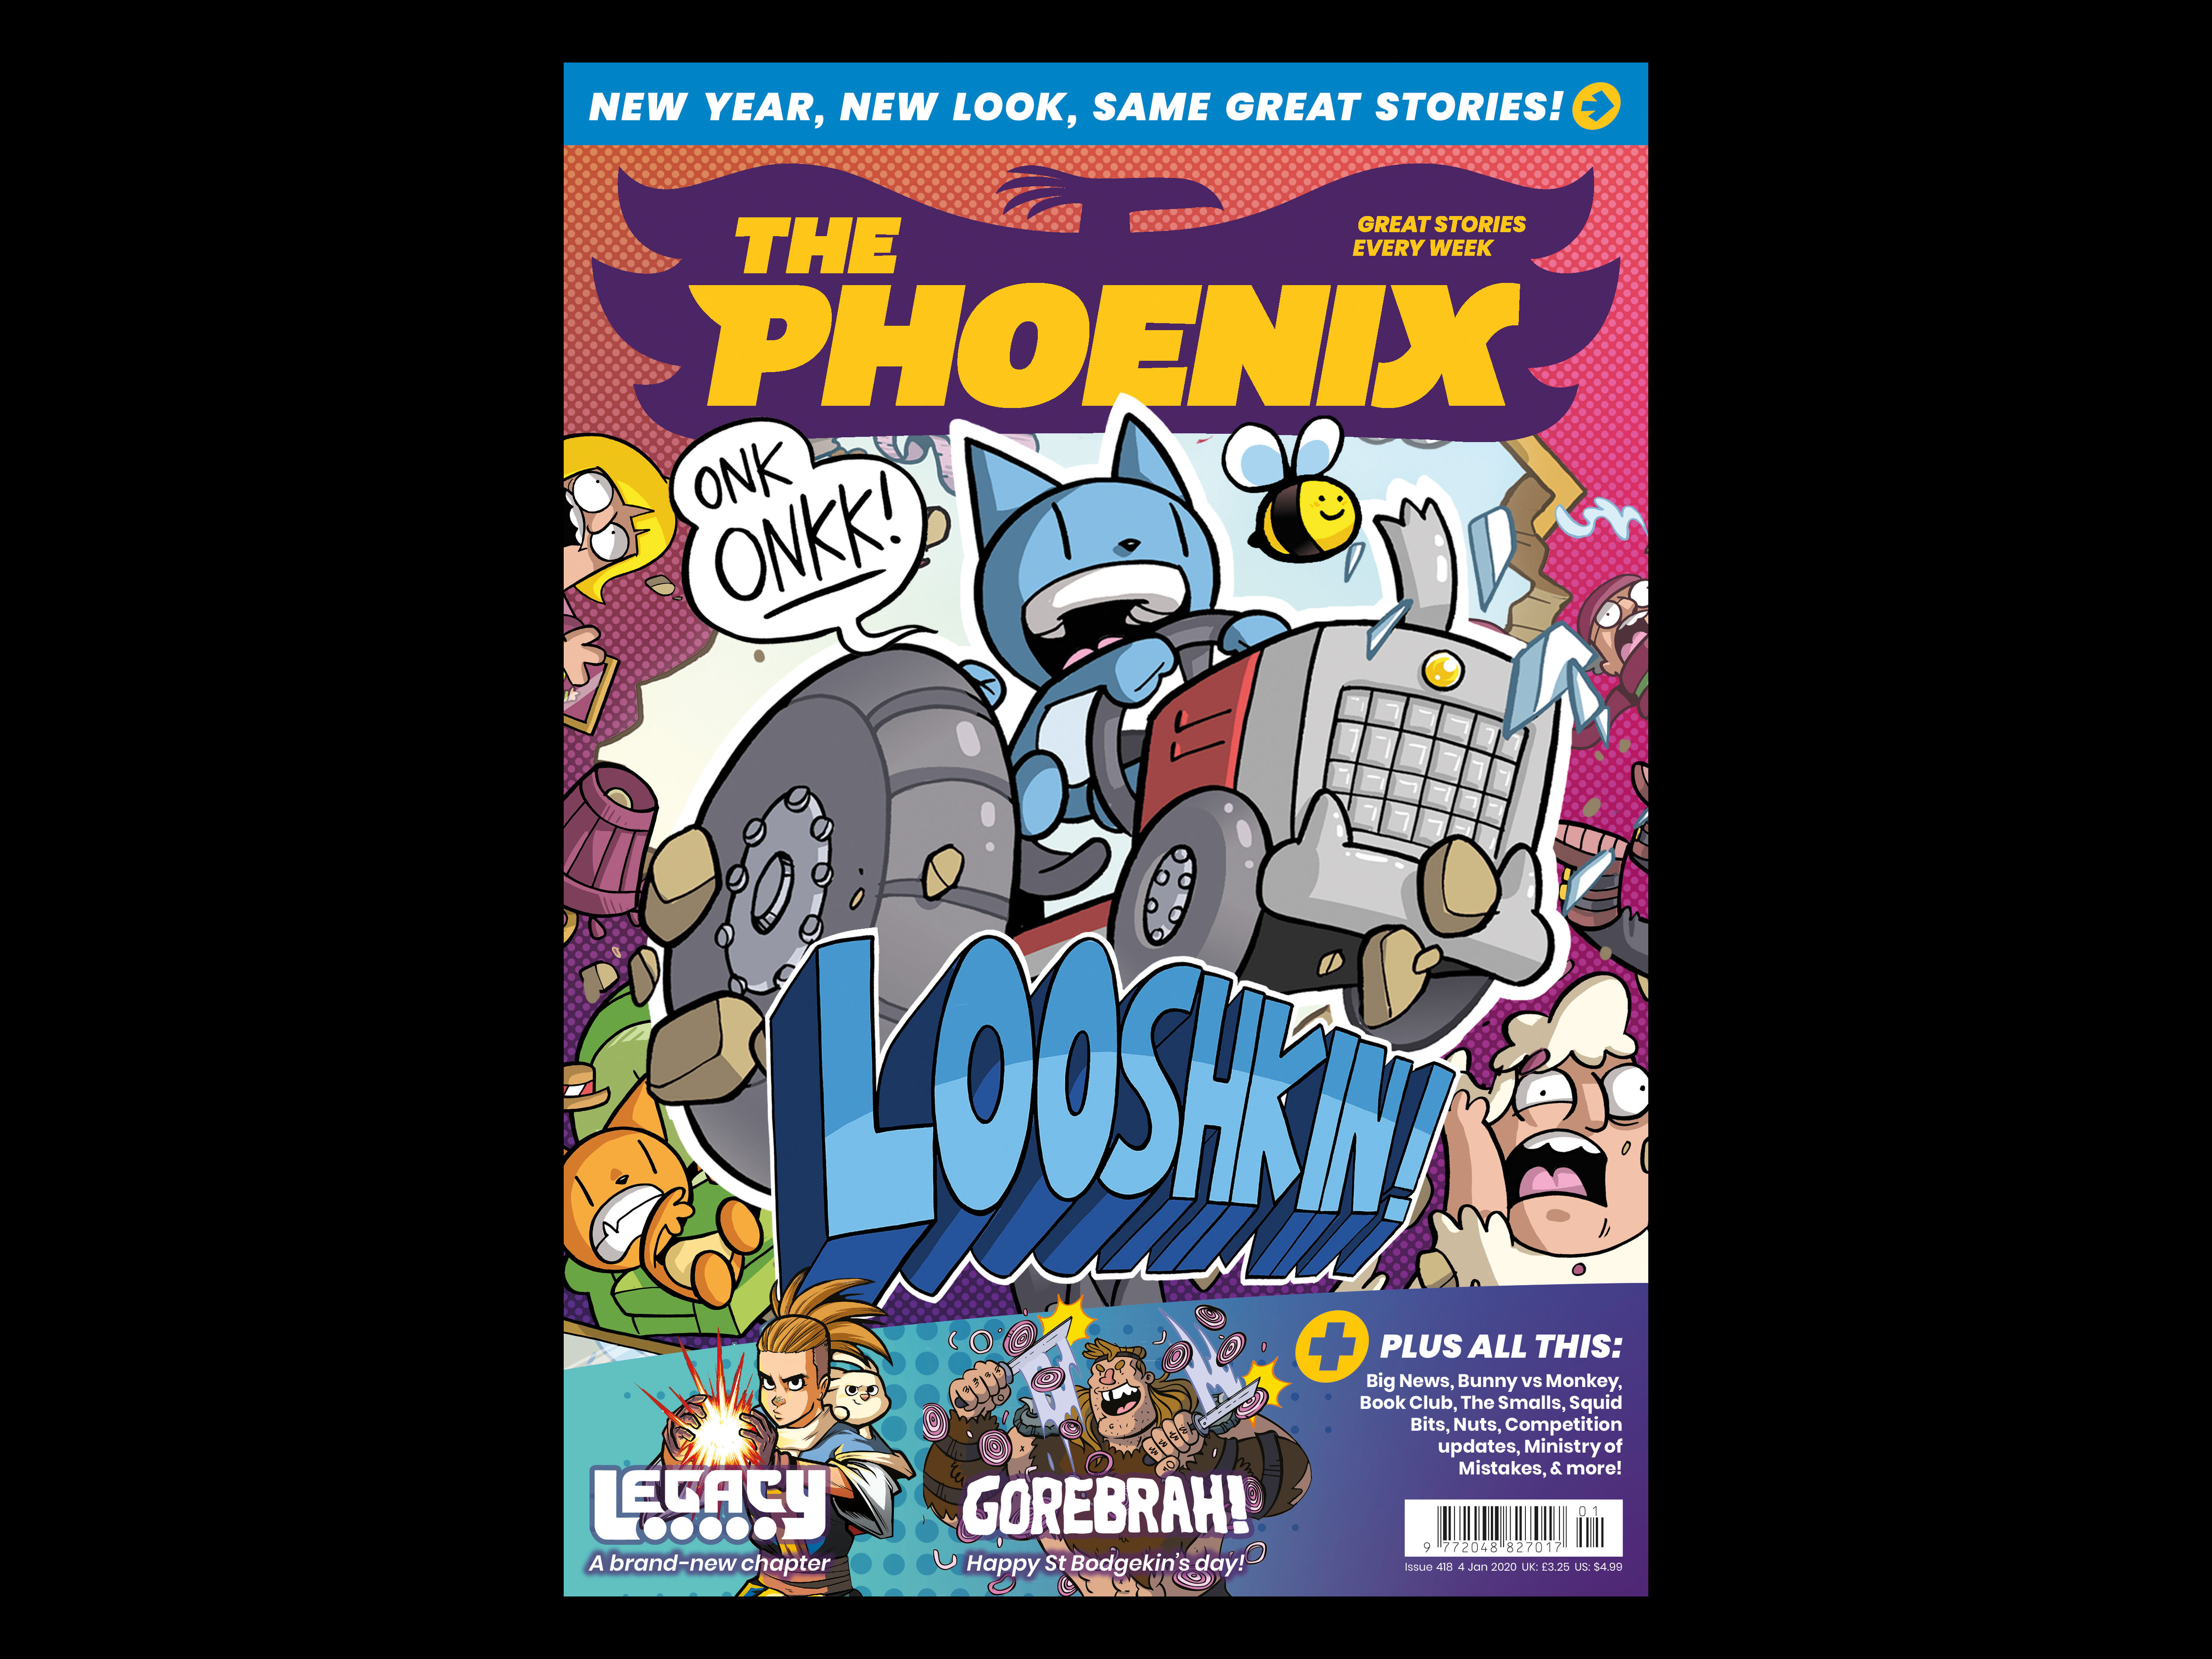 THE PHOENIX (£1 for 6 issues then £9.99/m)